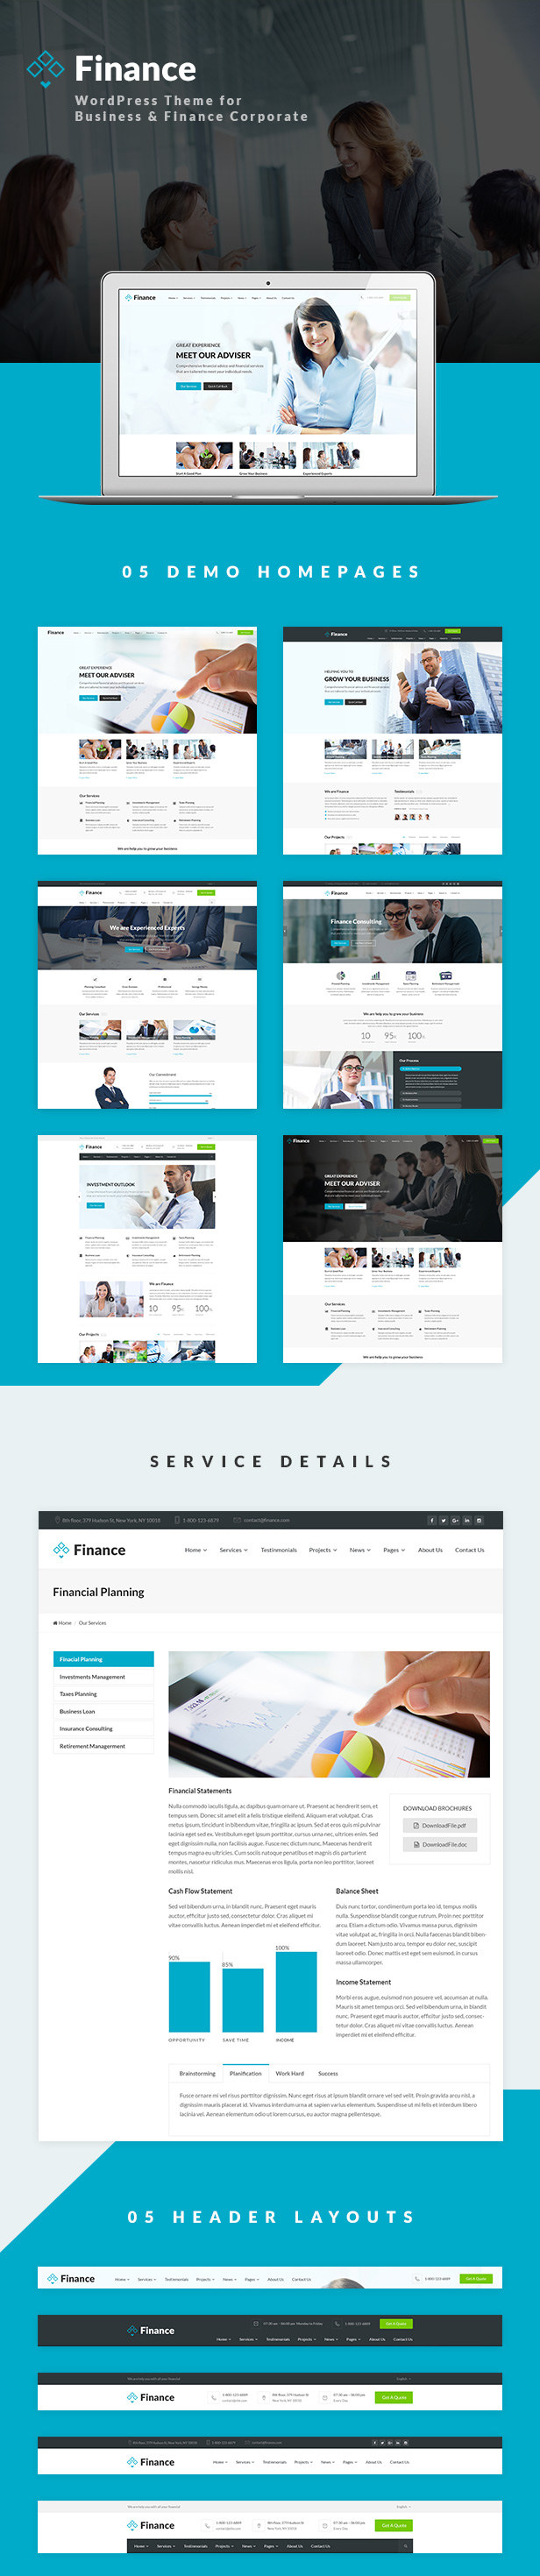 finance wp info 1 - Finance - Business & Financial, Broker, Consulting, Accounting WordPress Theme